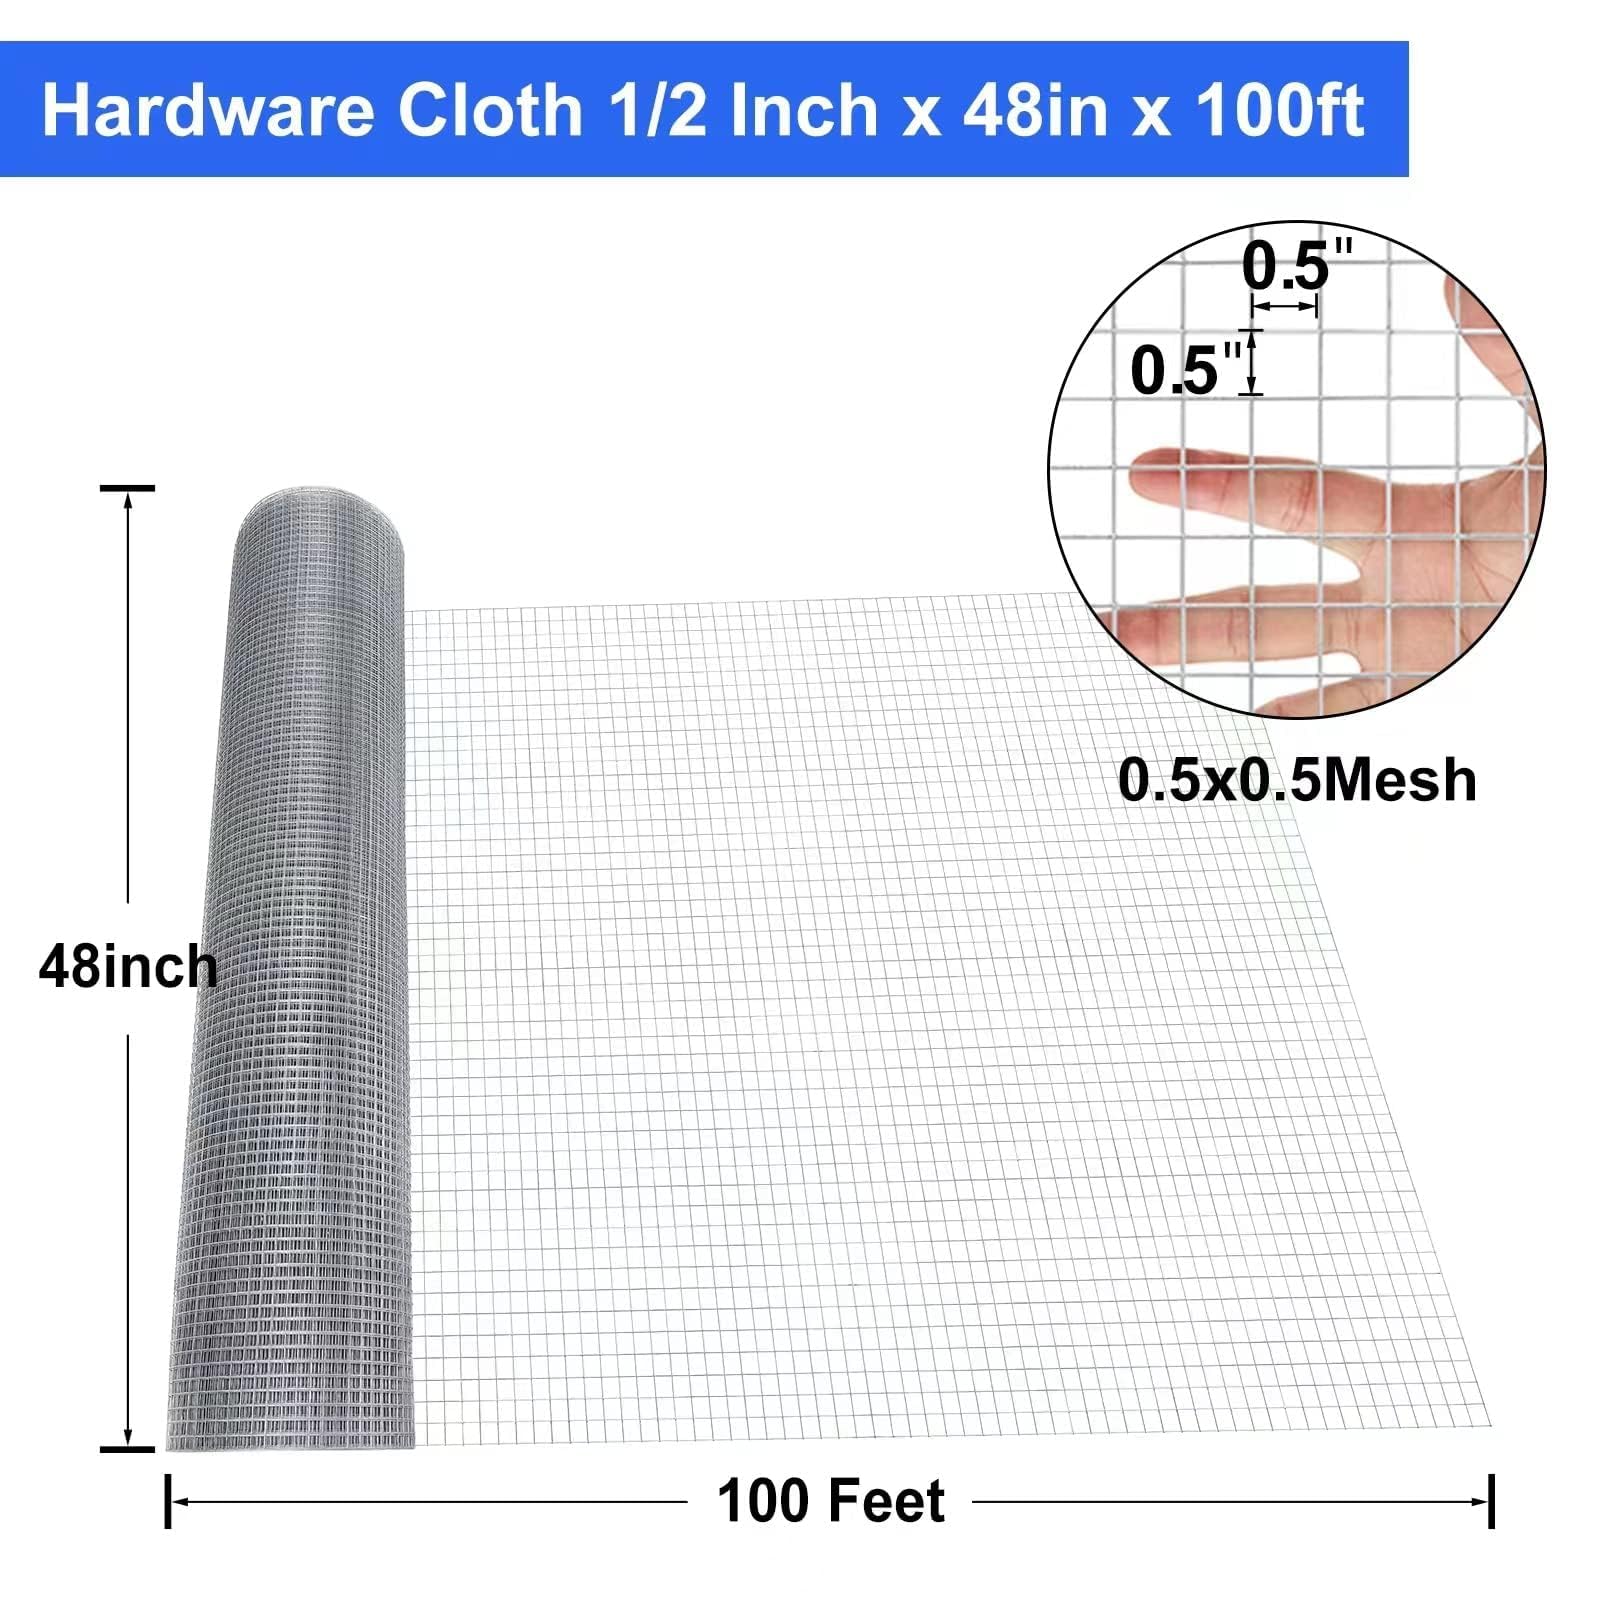 Land guard 19 Gauge Hardware Cloth, 1/2 inch 48inch×100ft Chicken Wire Fence, Galvanized Welded Cage Wire Mesh Roll Supports Poultry Netting Cage Fence……